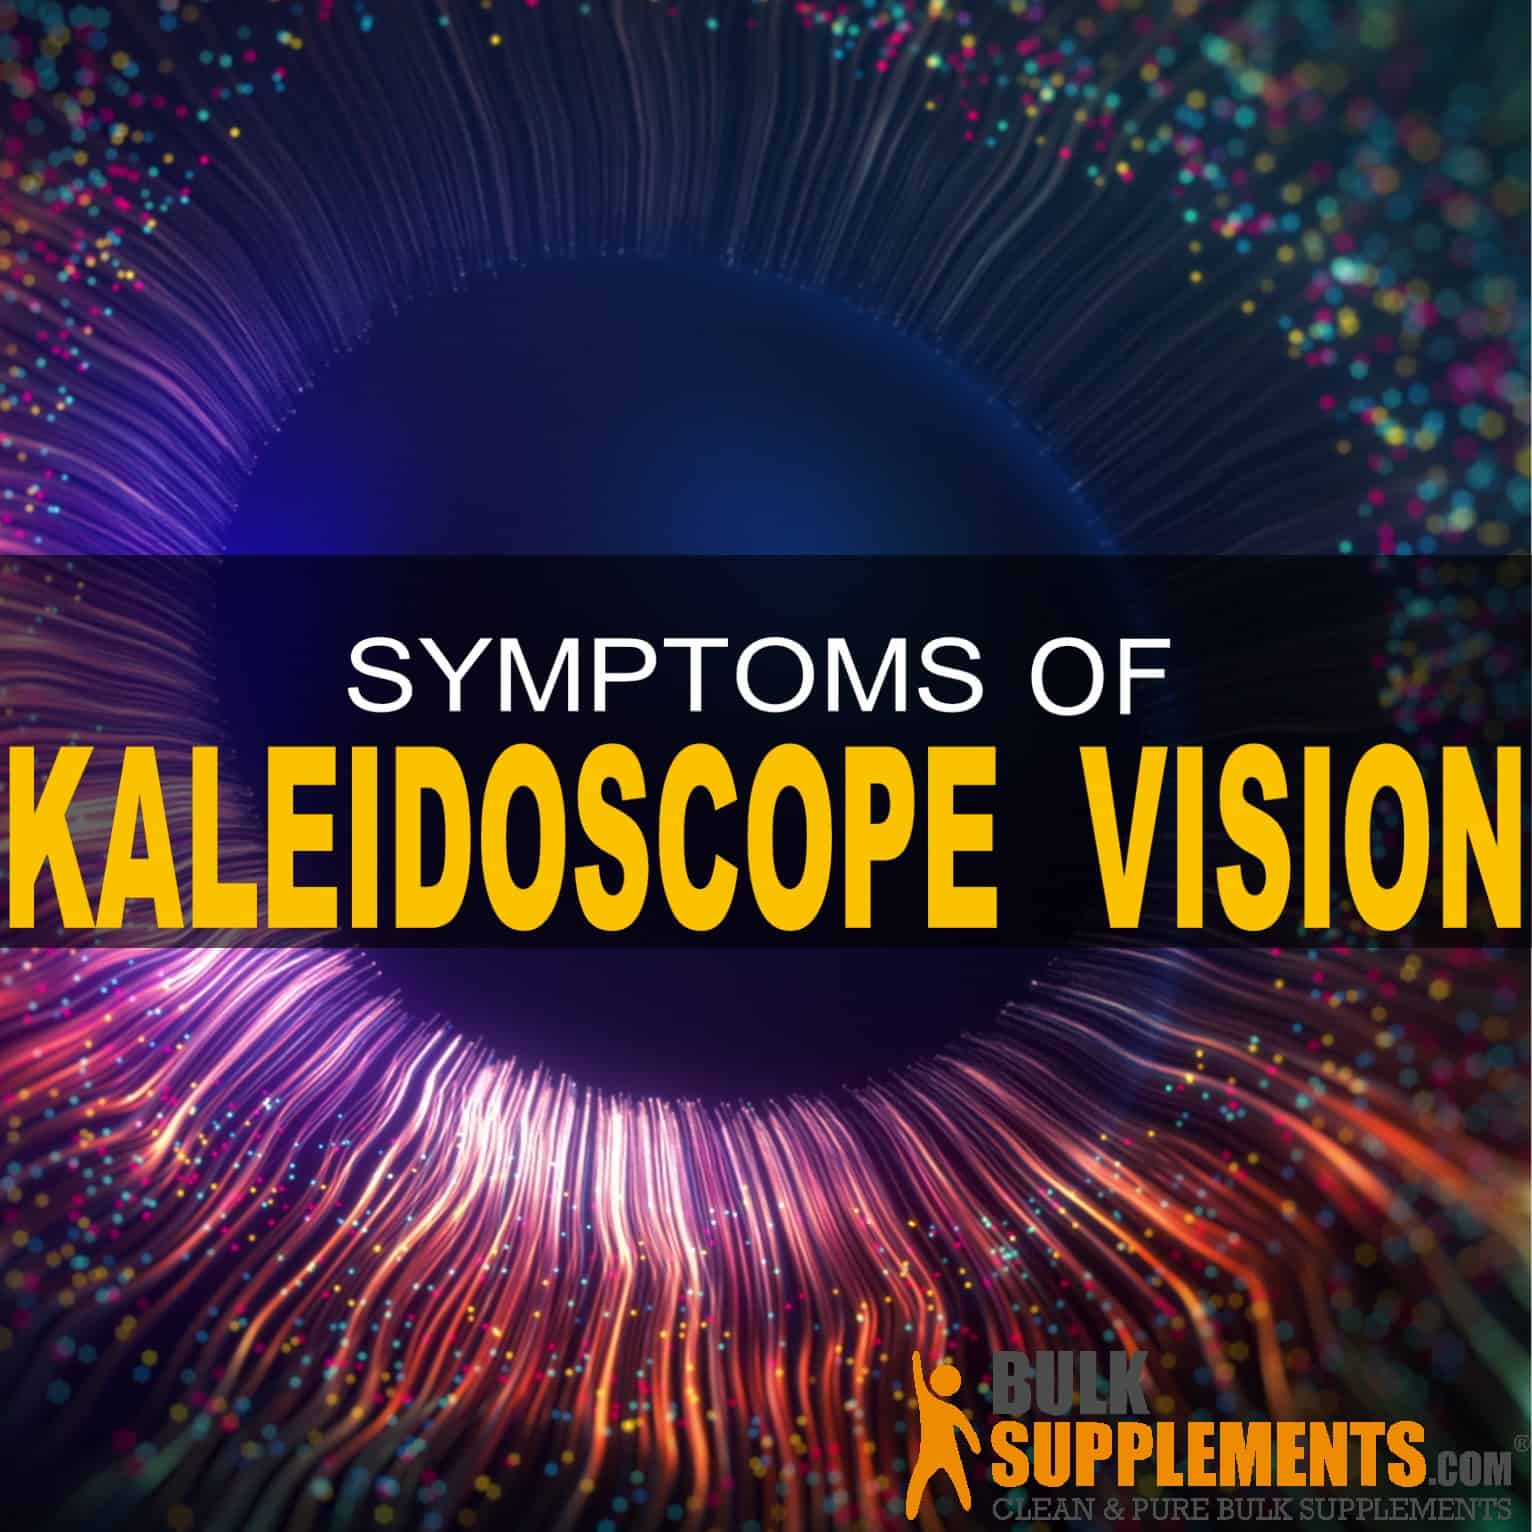 Kaleidoscope Vision: What It Is, Causes & Treatment